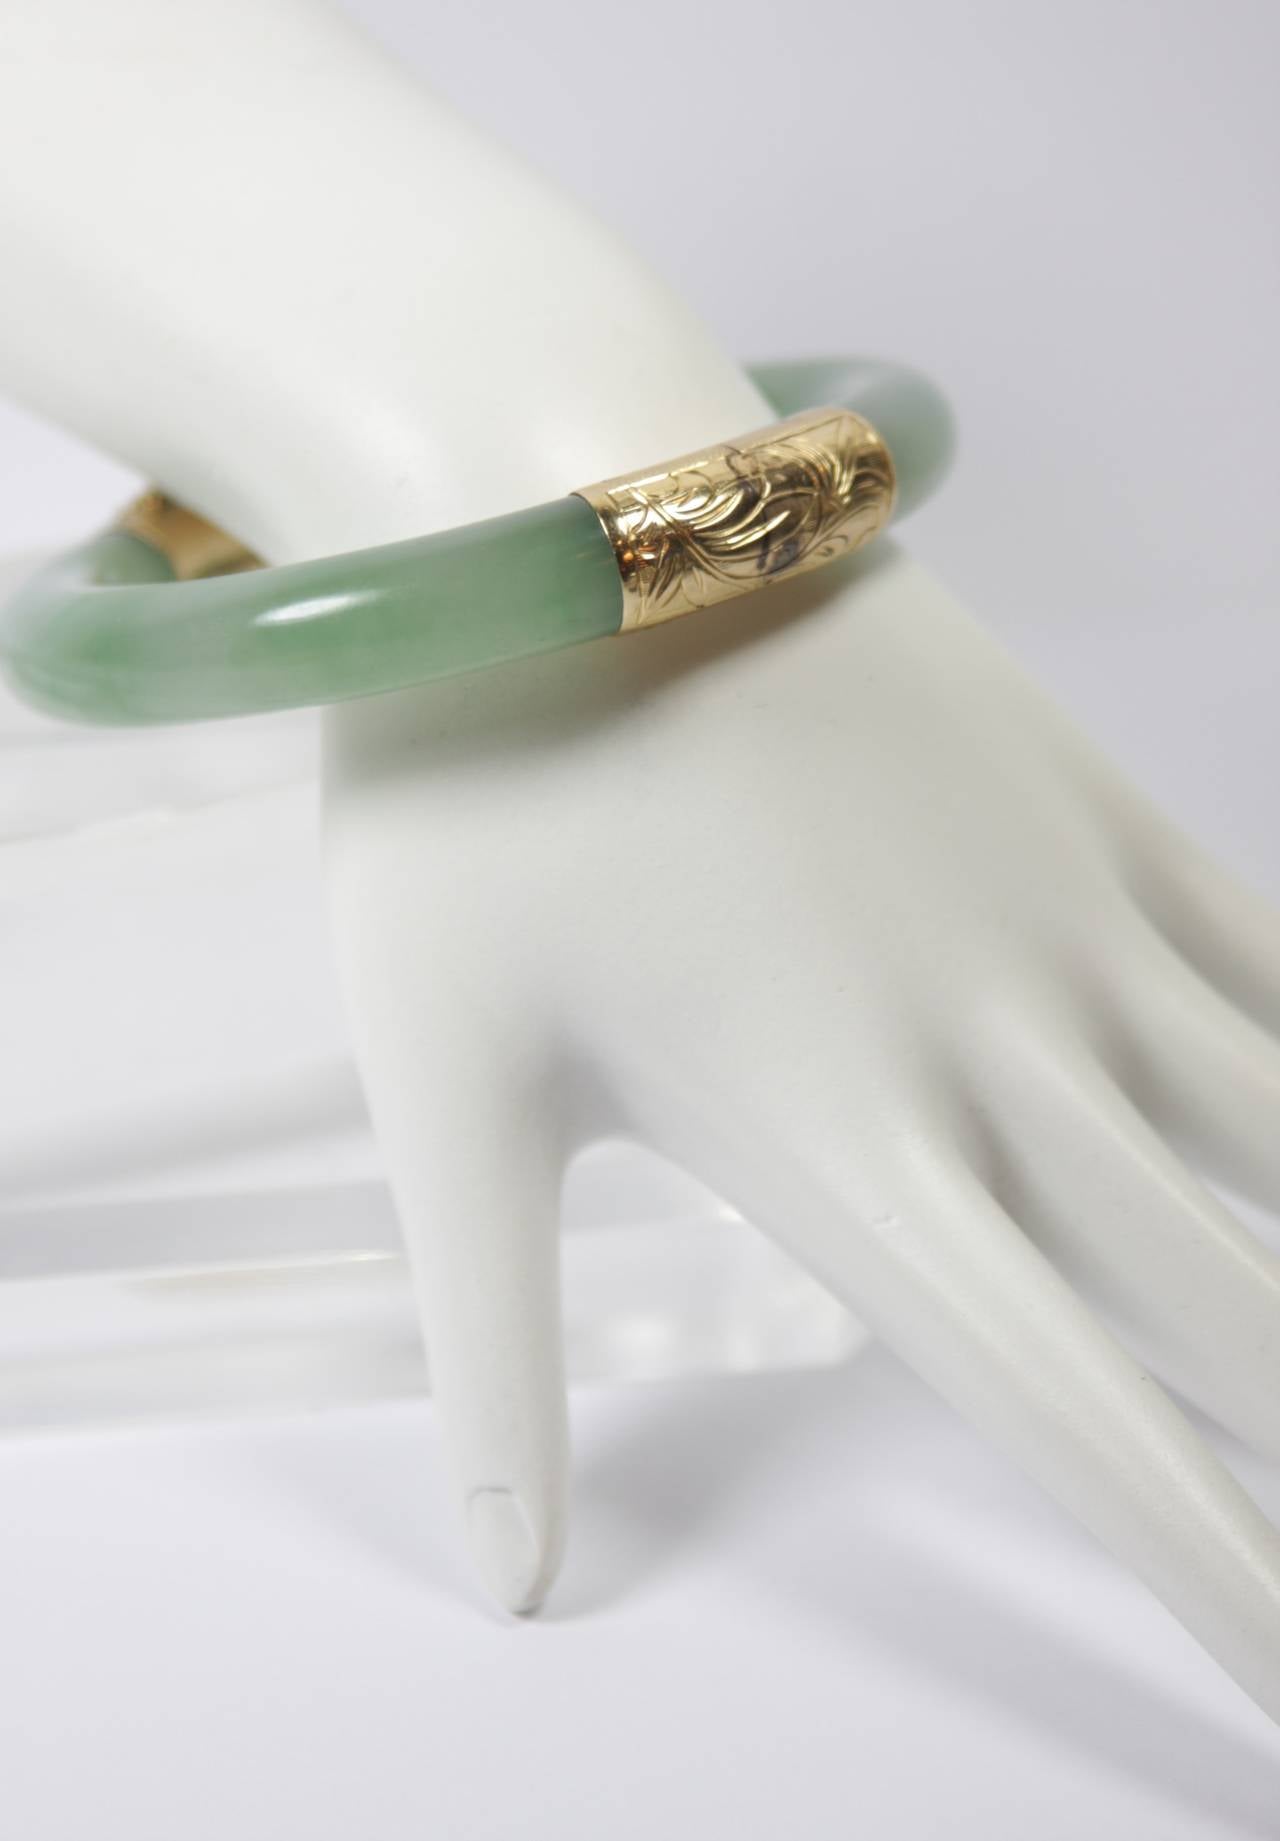 This Jade bracelet with 14kt gold is available through The Paper Bag Princess of Beverly Hills. Please feel free to contact us with any inquiries you may have. 

Specs: 
White Jade 
Measures: 7